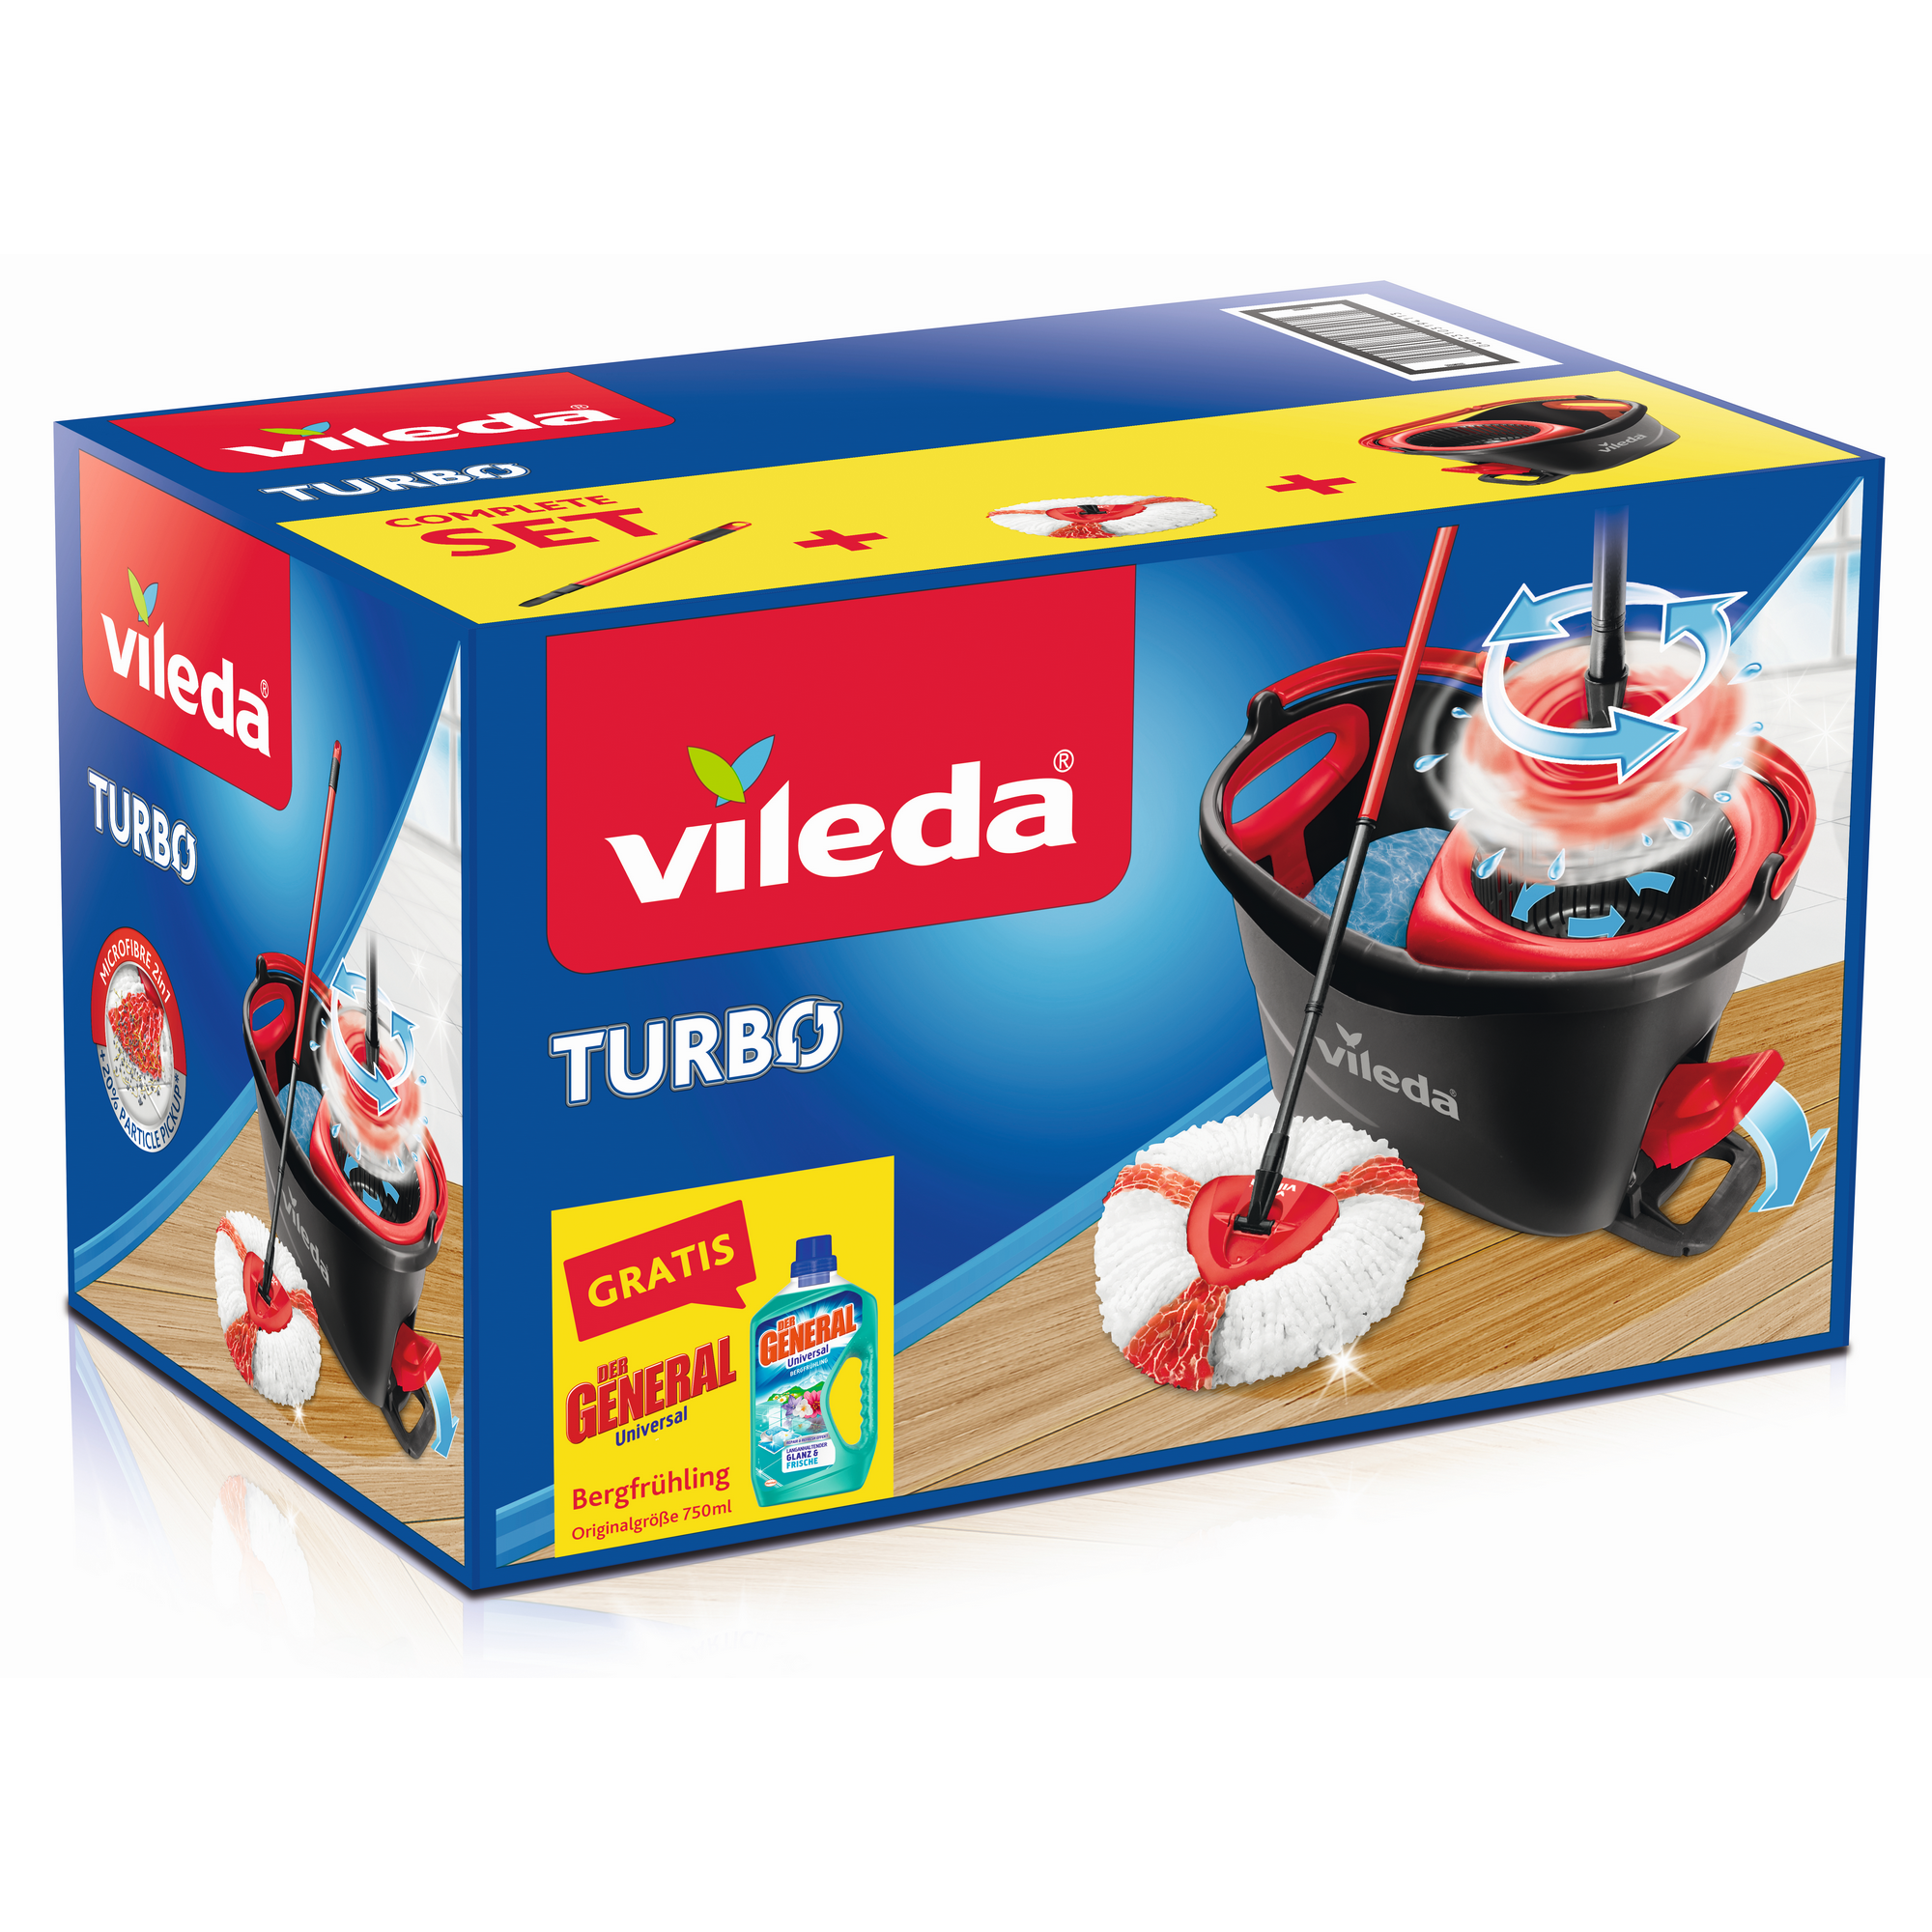 Bodenwischer-Set 'Turbo' Microfaser + product picture